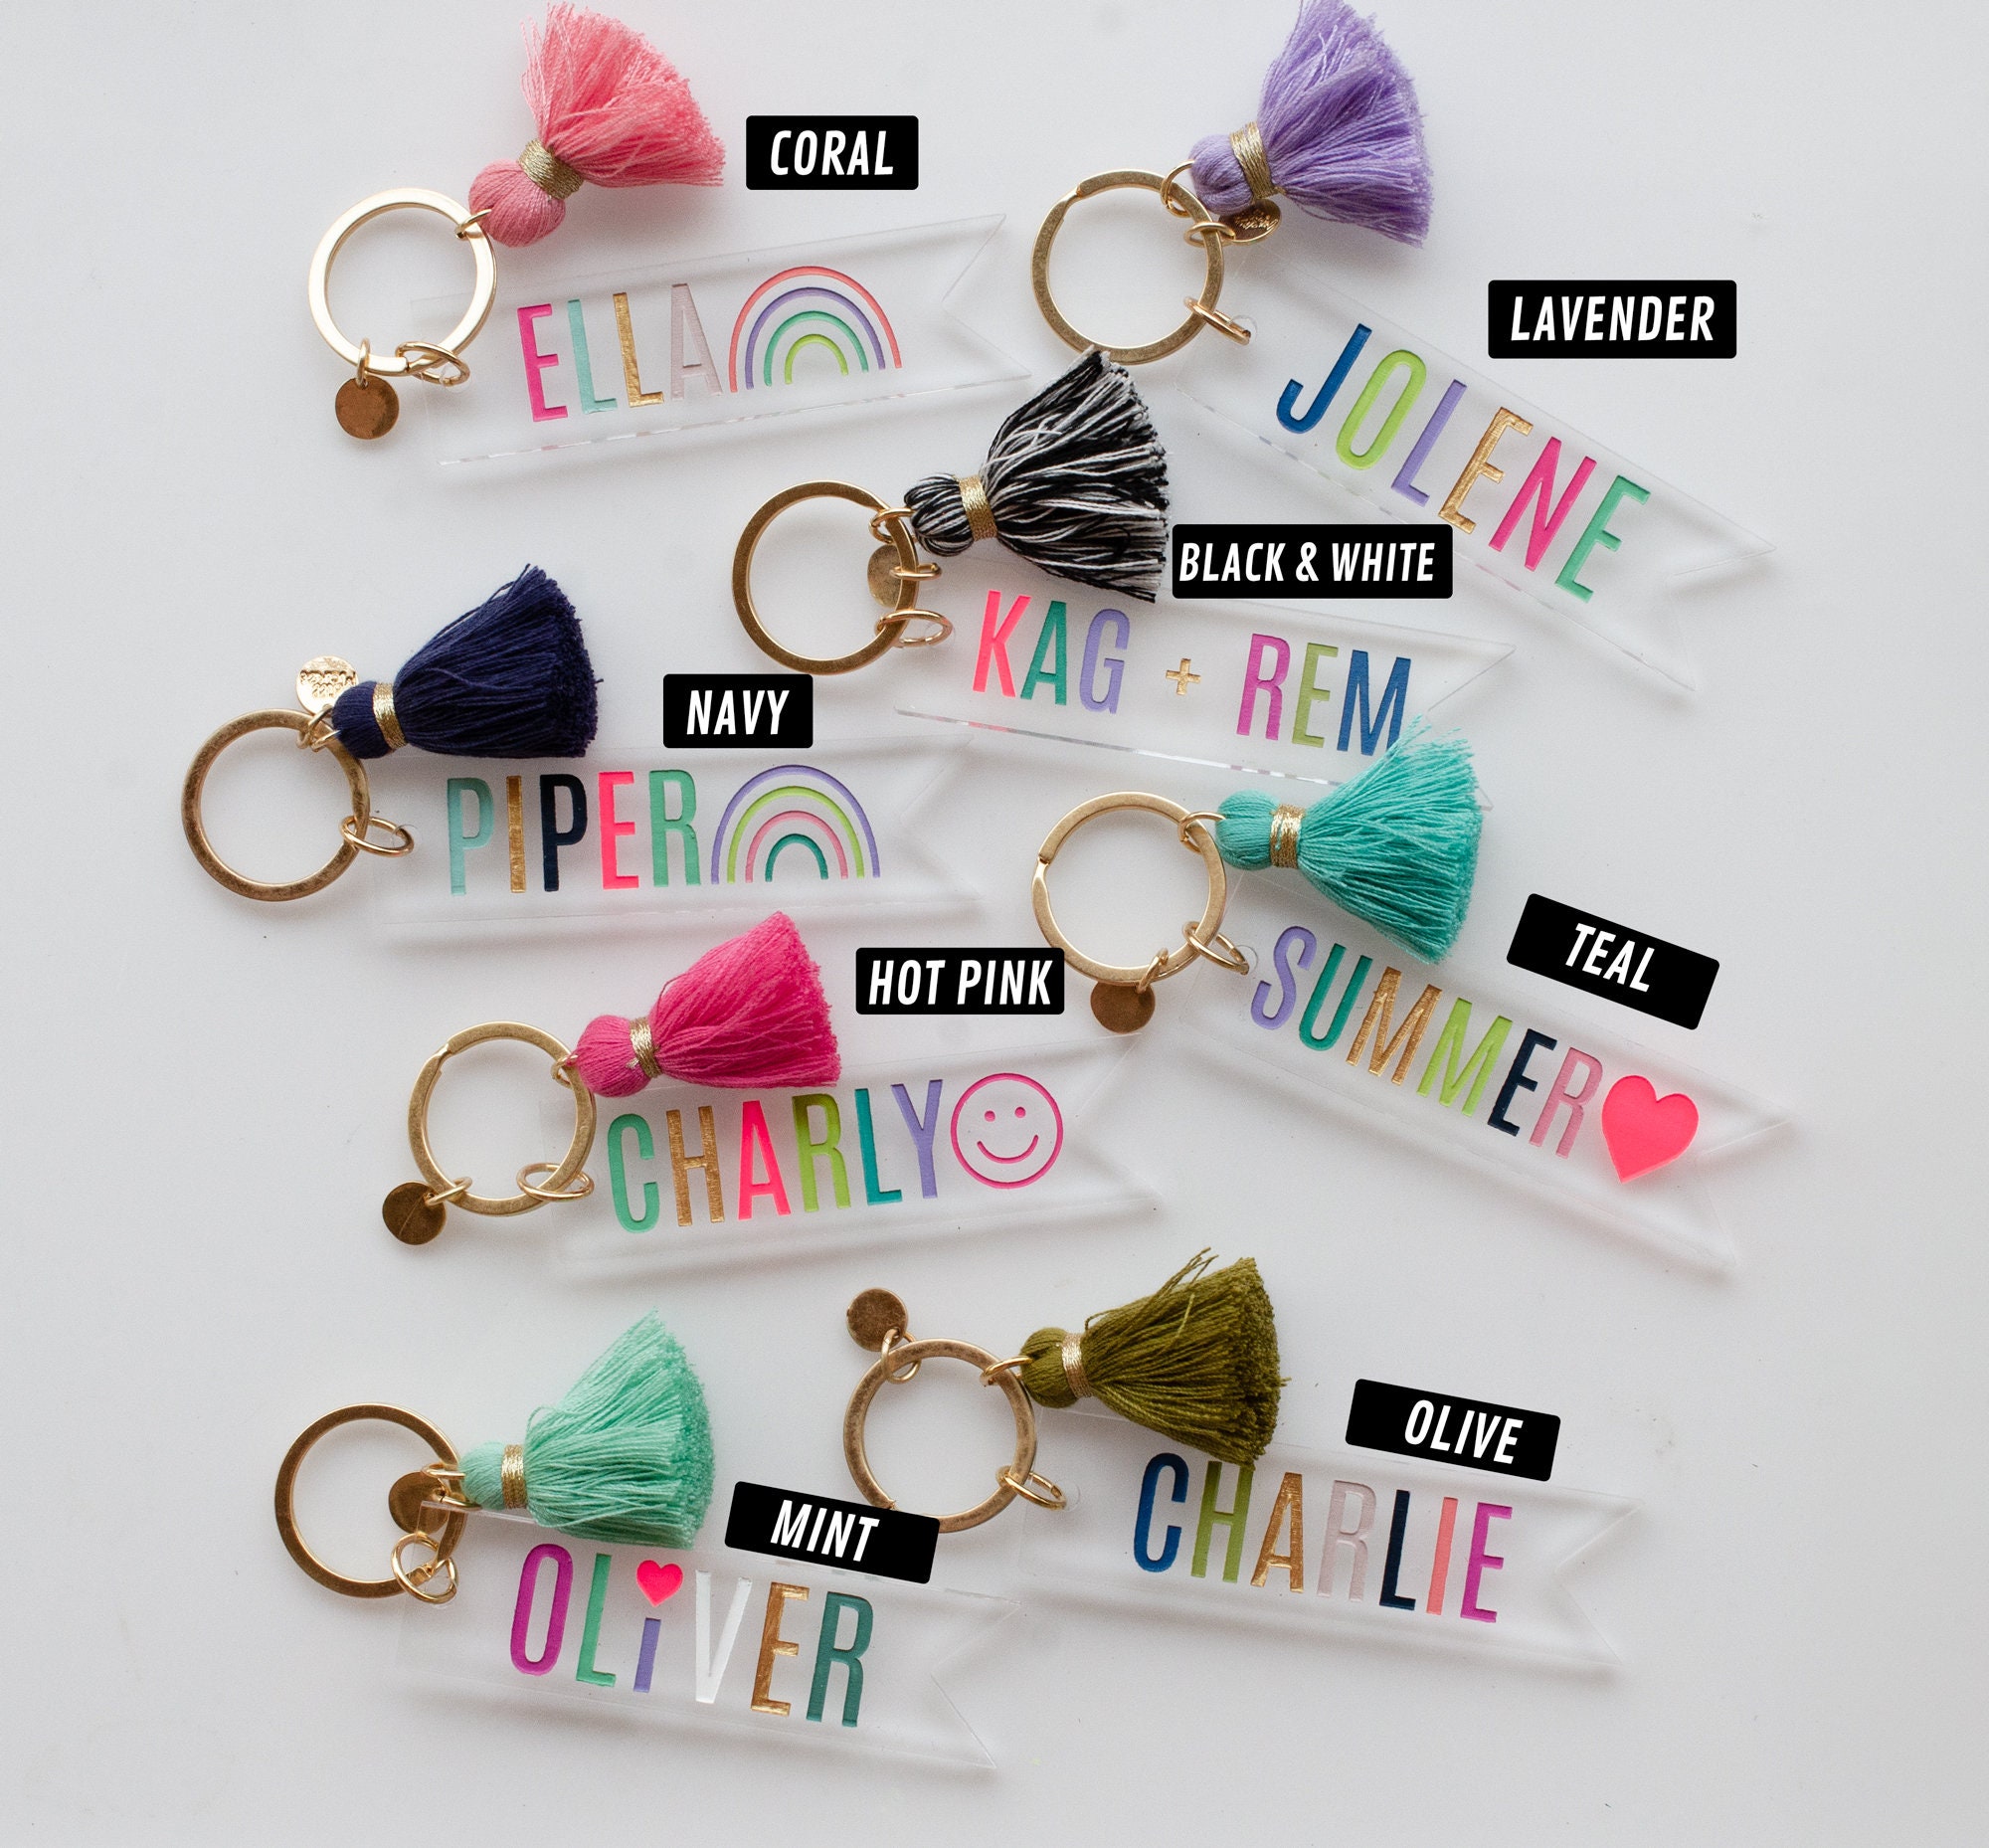 Personalized-Acrylic Keychains with Tassels - Key Chains & Lanyards, Facebook Marketplace